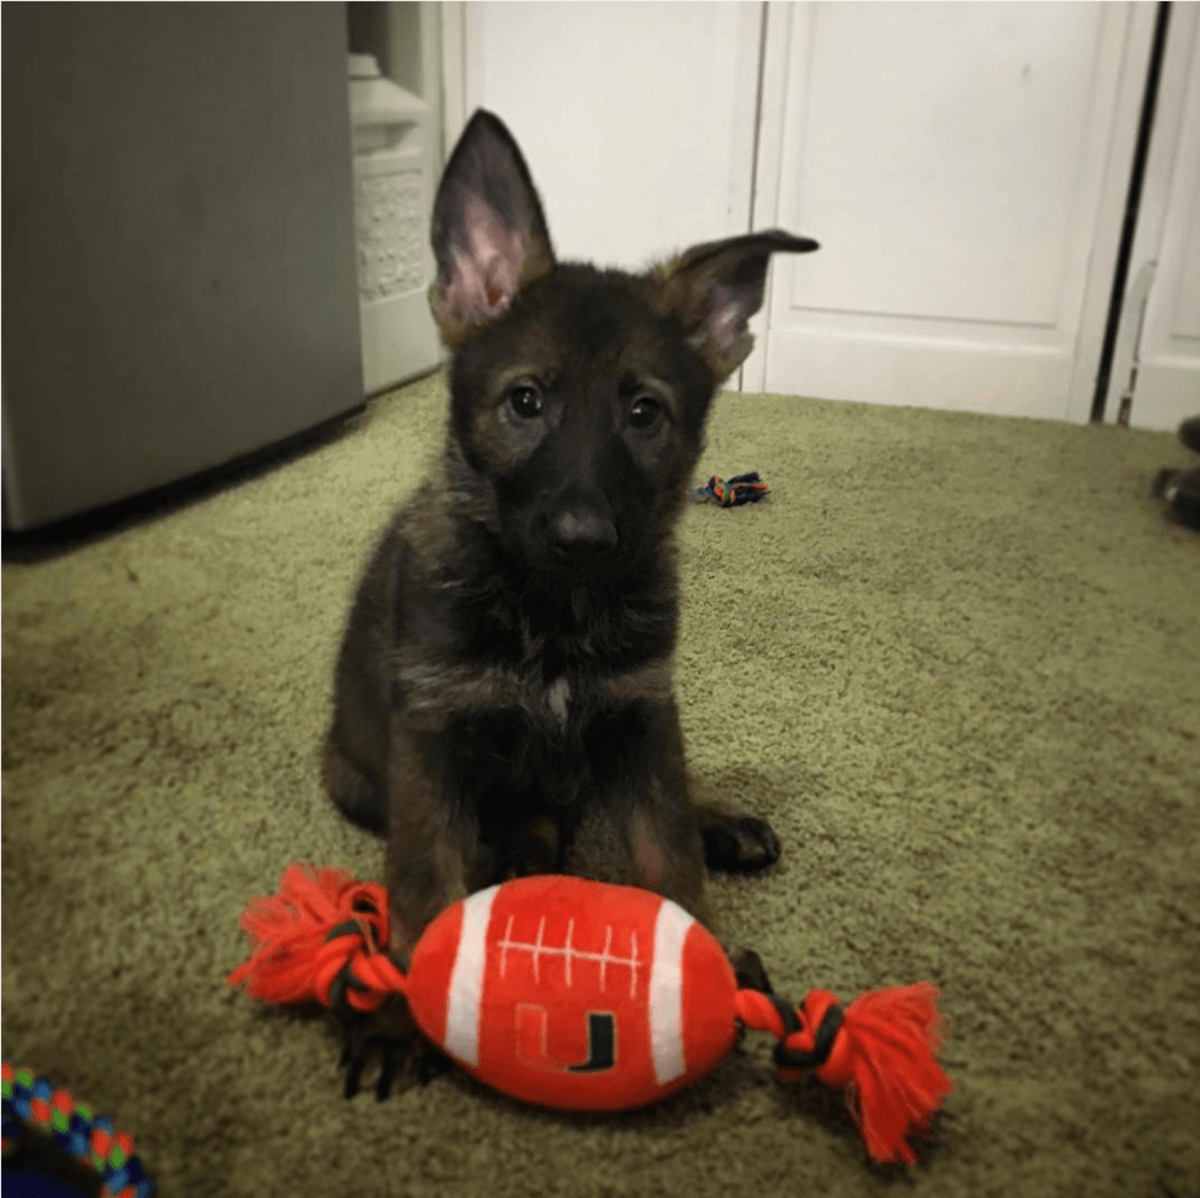 A puppy plays with a University of Miami toy.